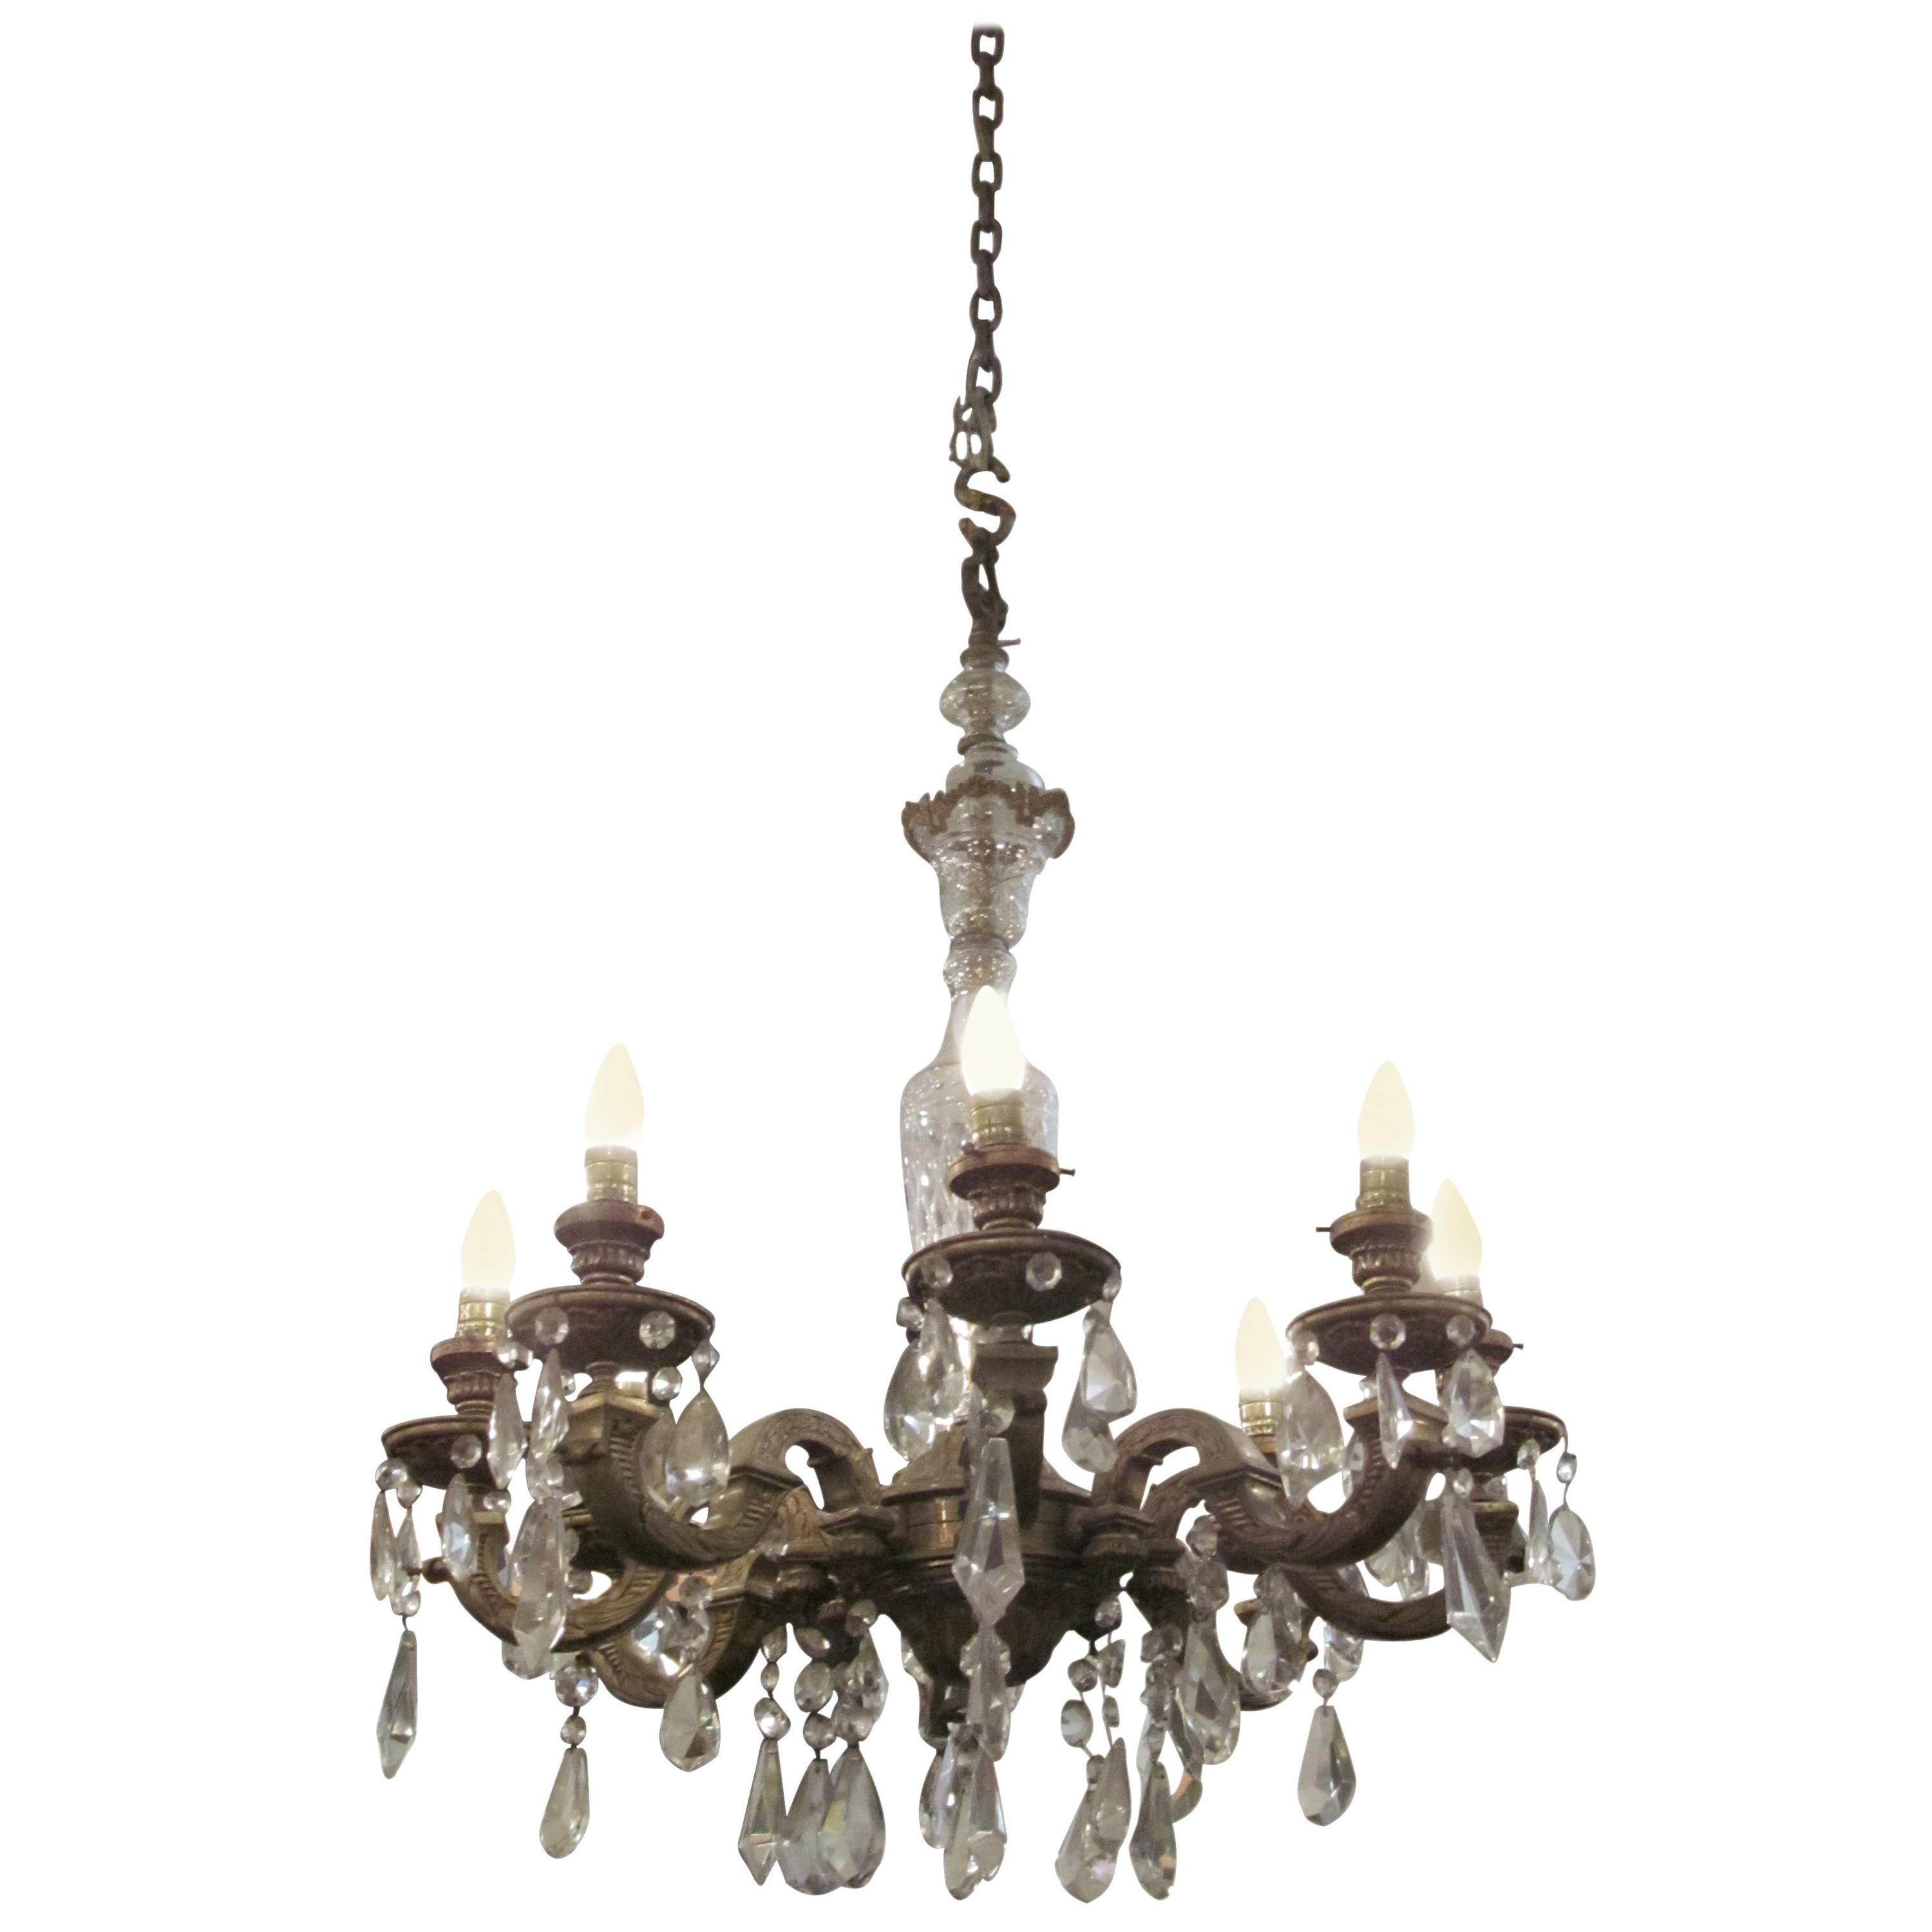 1920s Eight-Arm Ornate Crystal and Bronze Chandelier